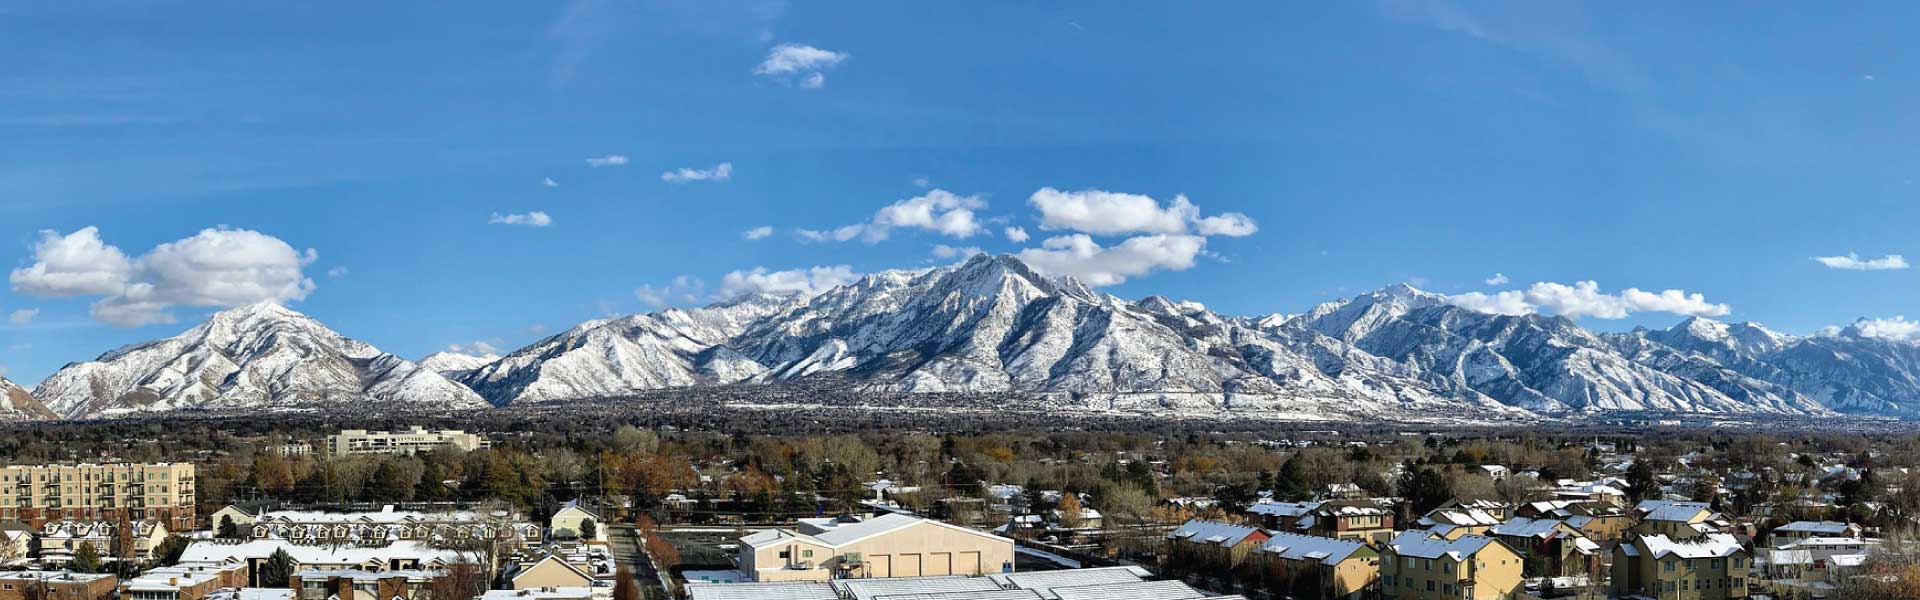 View of mountains surrounding Salt Lake City on a sunny day